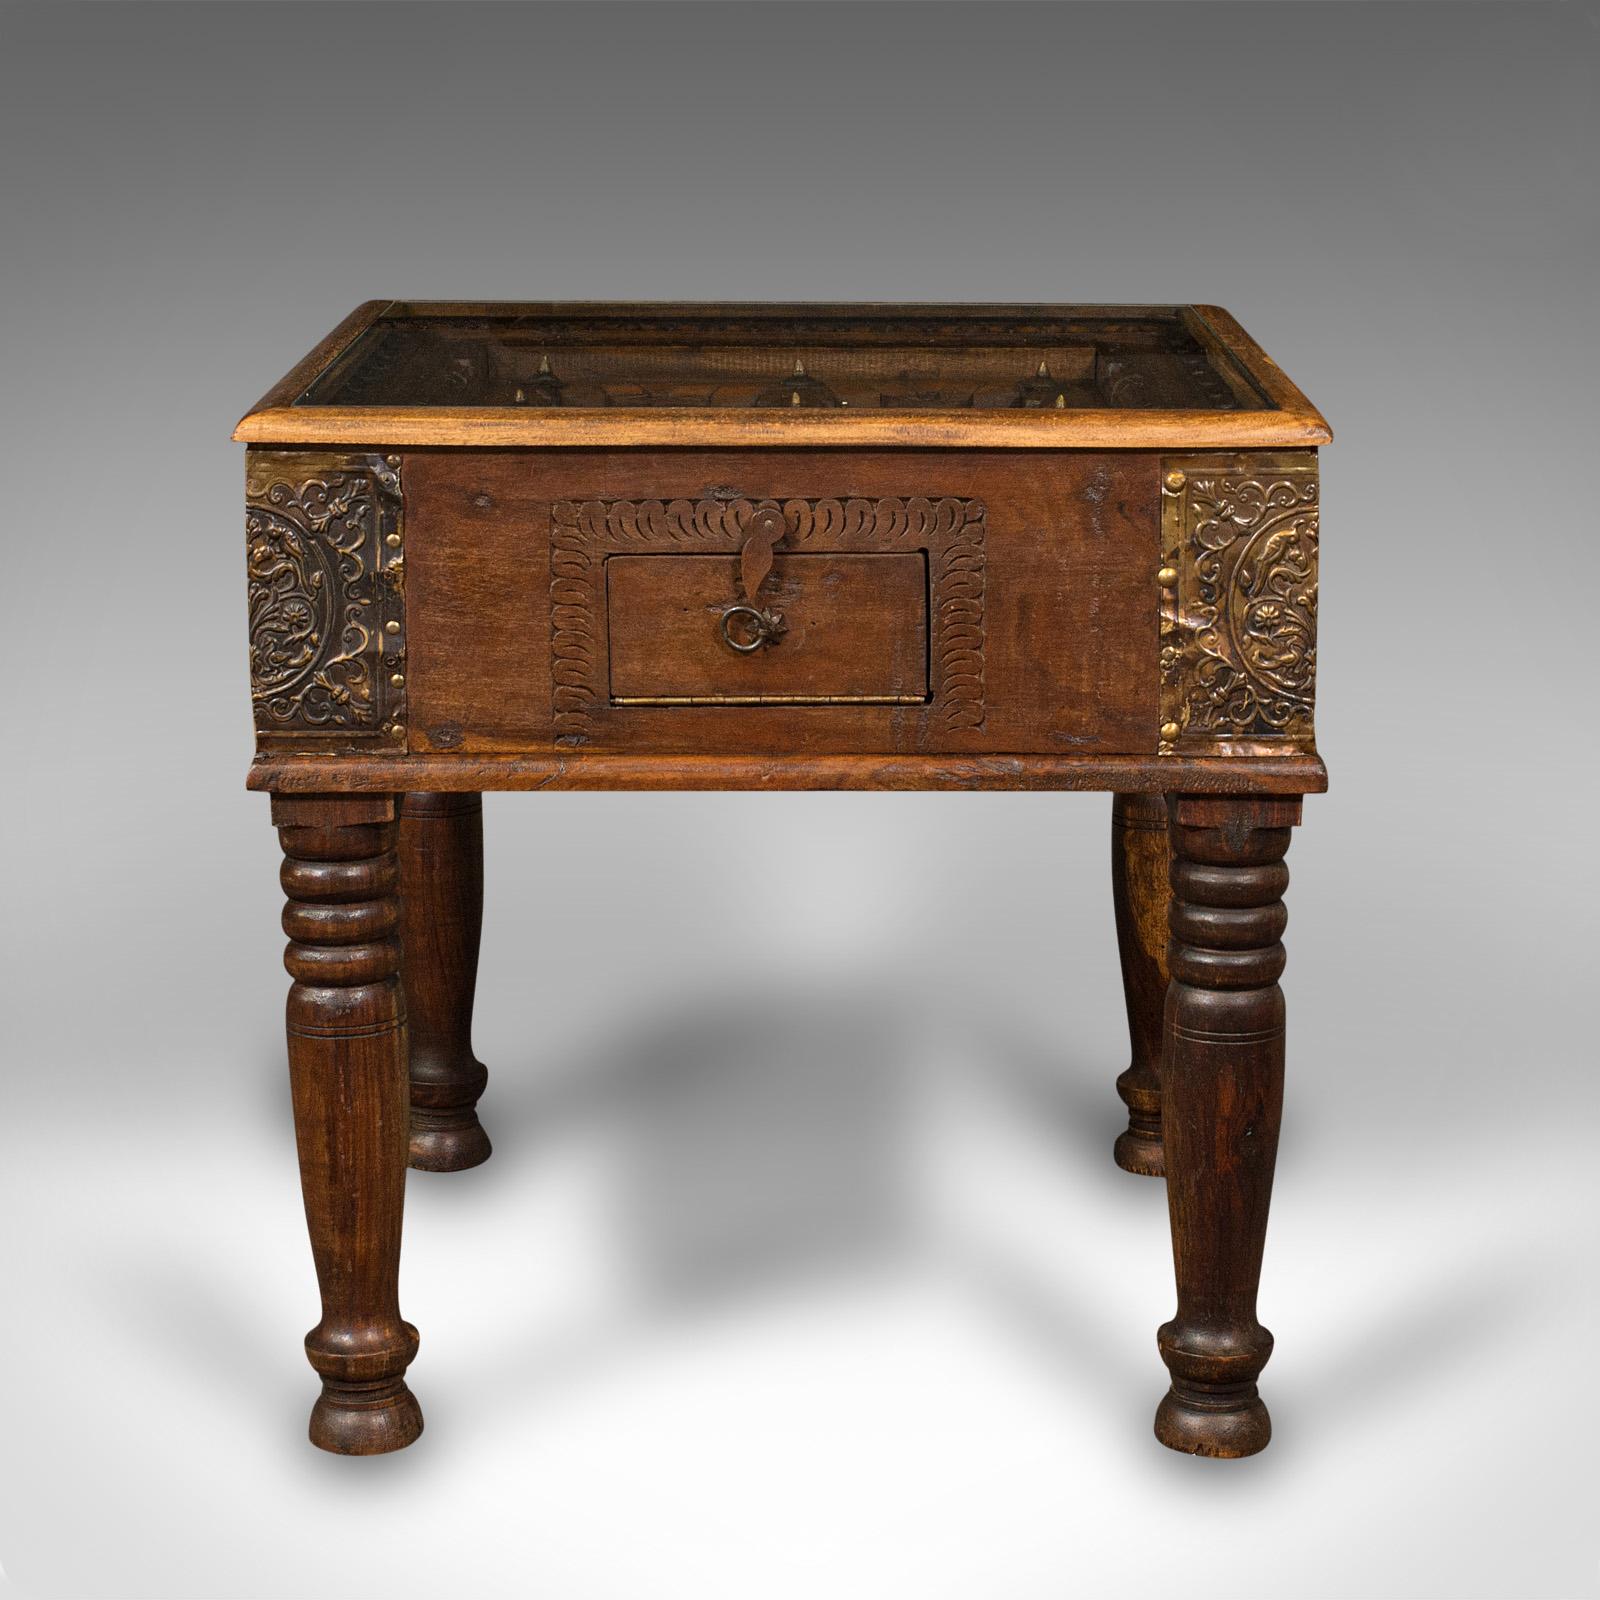 This is a vintage carved spice table. A Far Eastern, mahogany glass topped coffee or lamp table with brass mounts, dating to the late Art Deco period, circa 1940.

Fascinating table with a striking, carved inset gallery
Displays a desirable aged